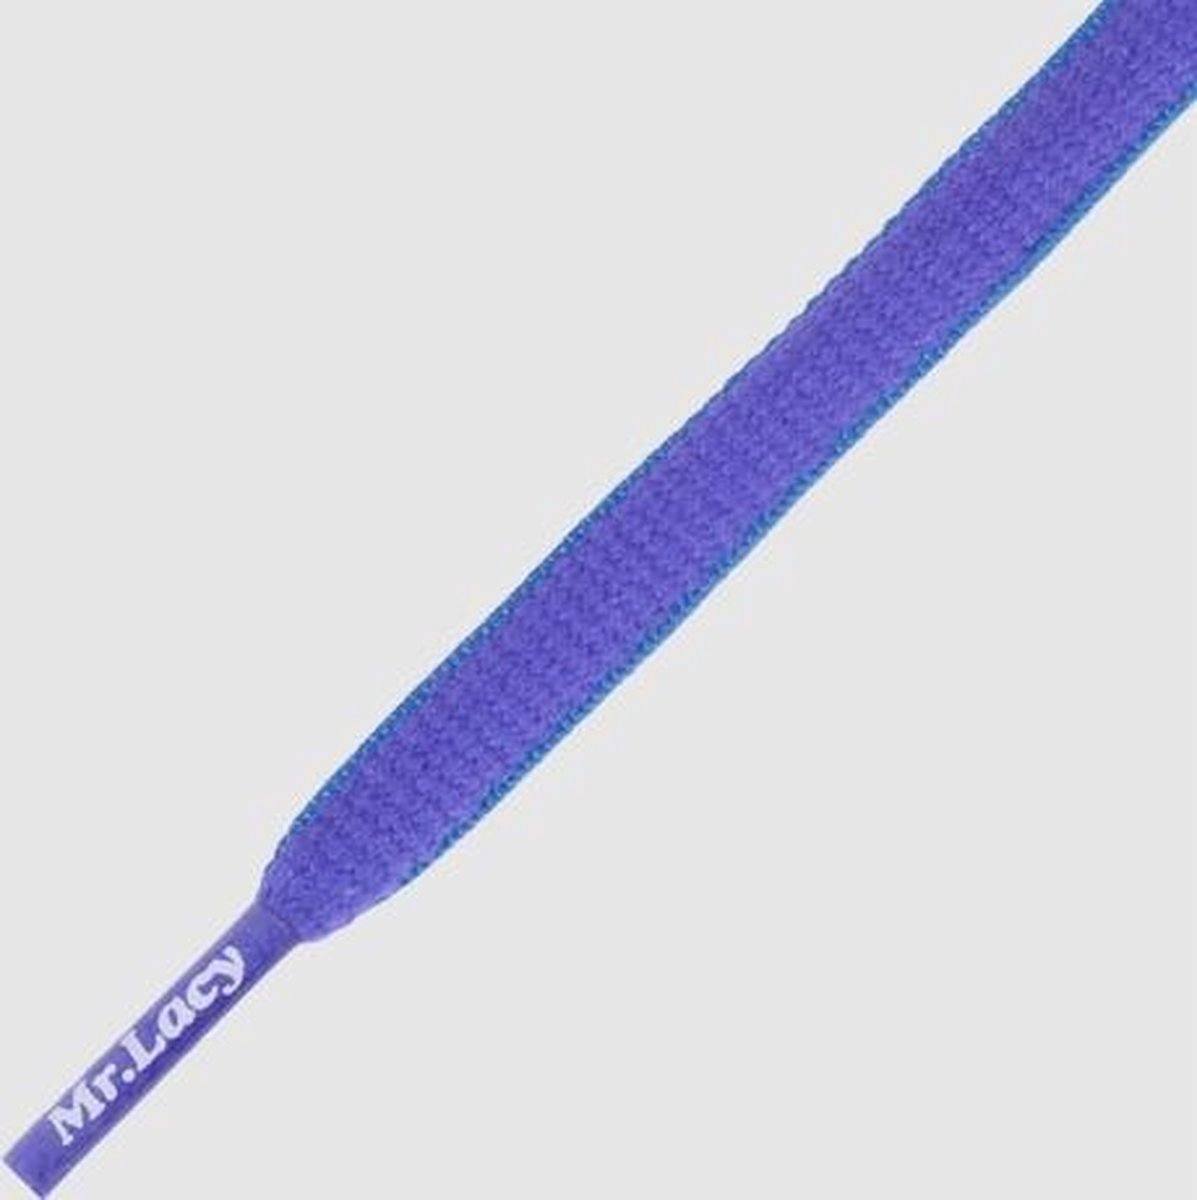 8 mm x 130 cm Ovaal Violet Blauw - Slimmies Two Tone Mr.Lacy veters